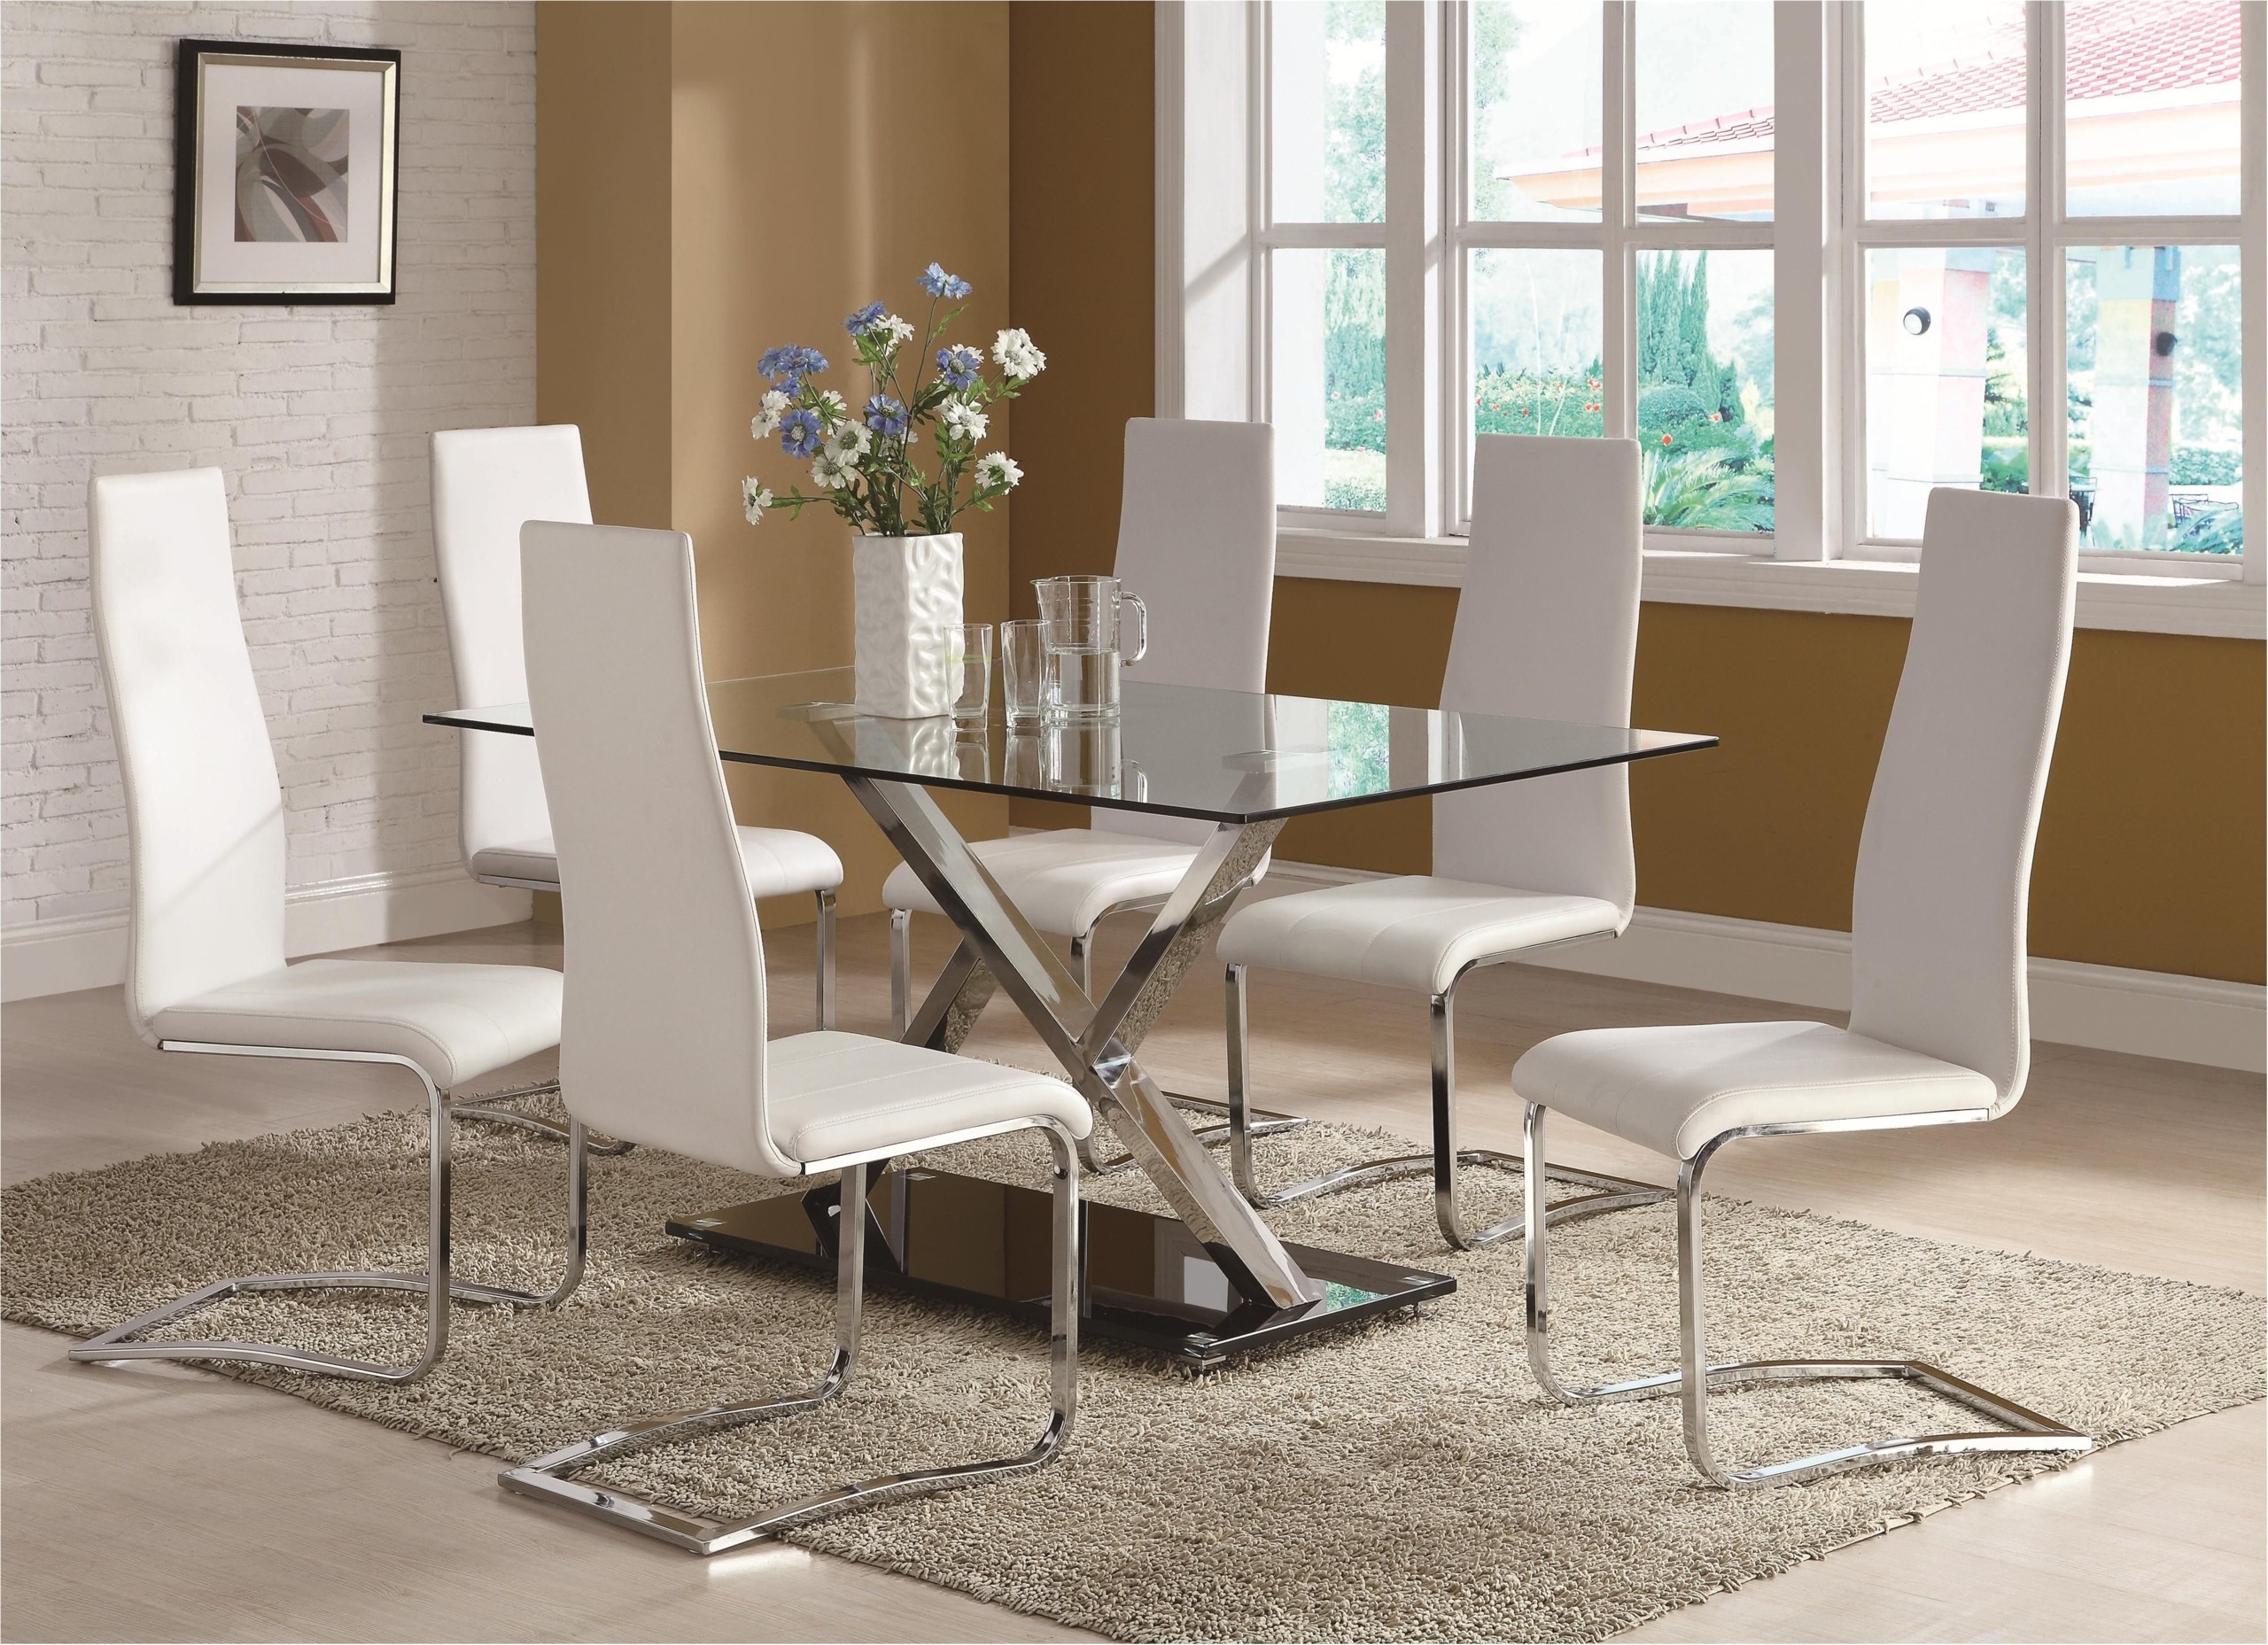 Steel glass dining table